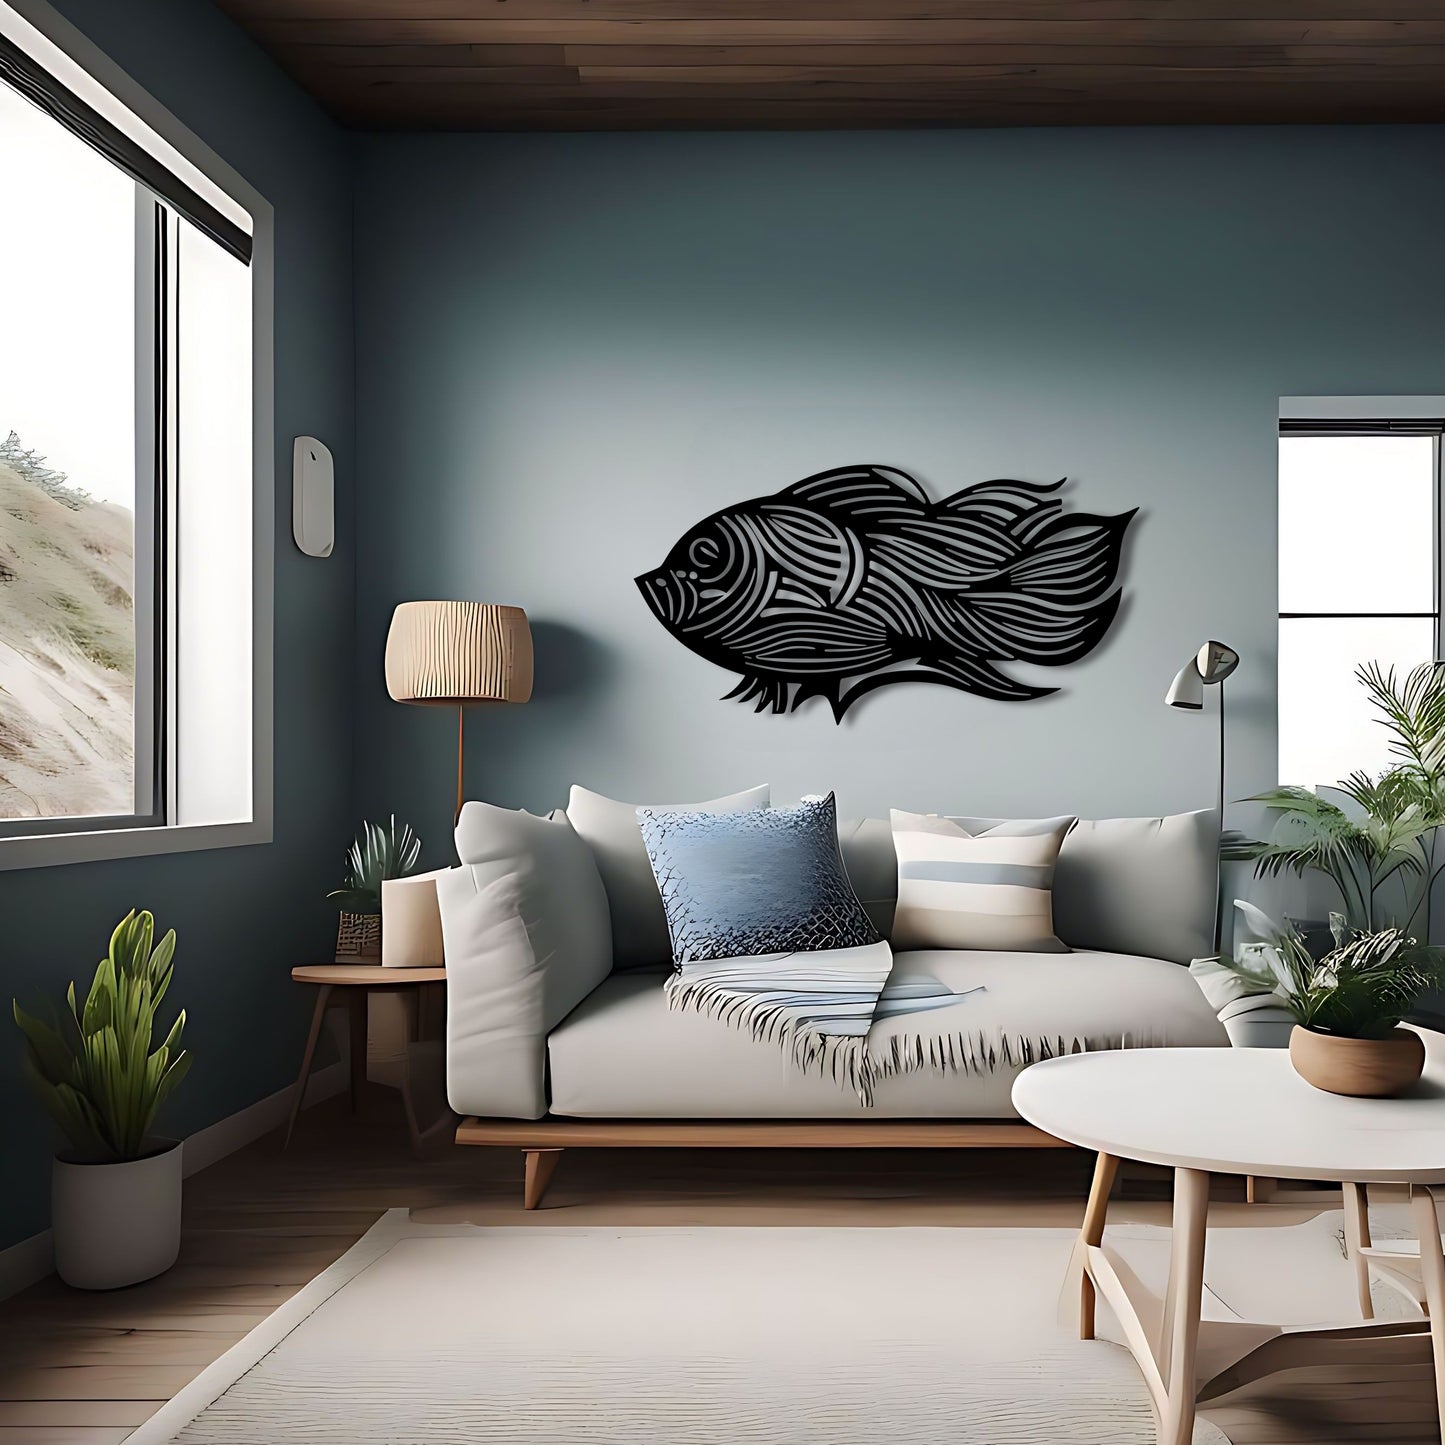 Flowing Lines of the Sea - Abstract Fish Metal Wall Art